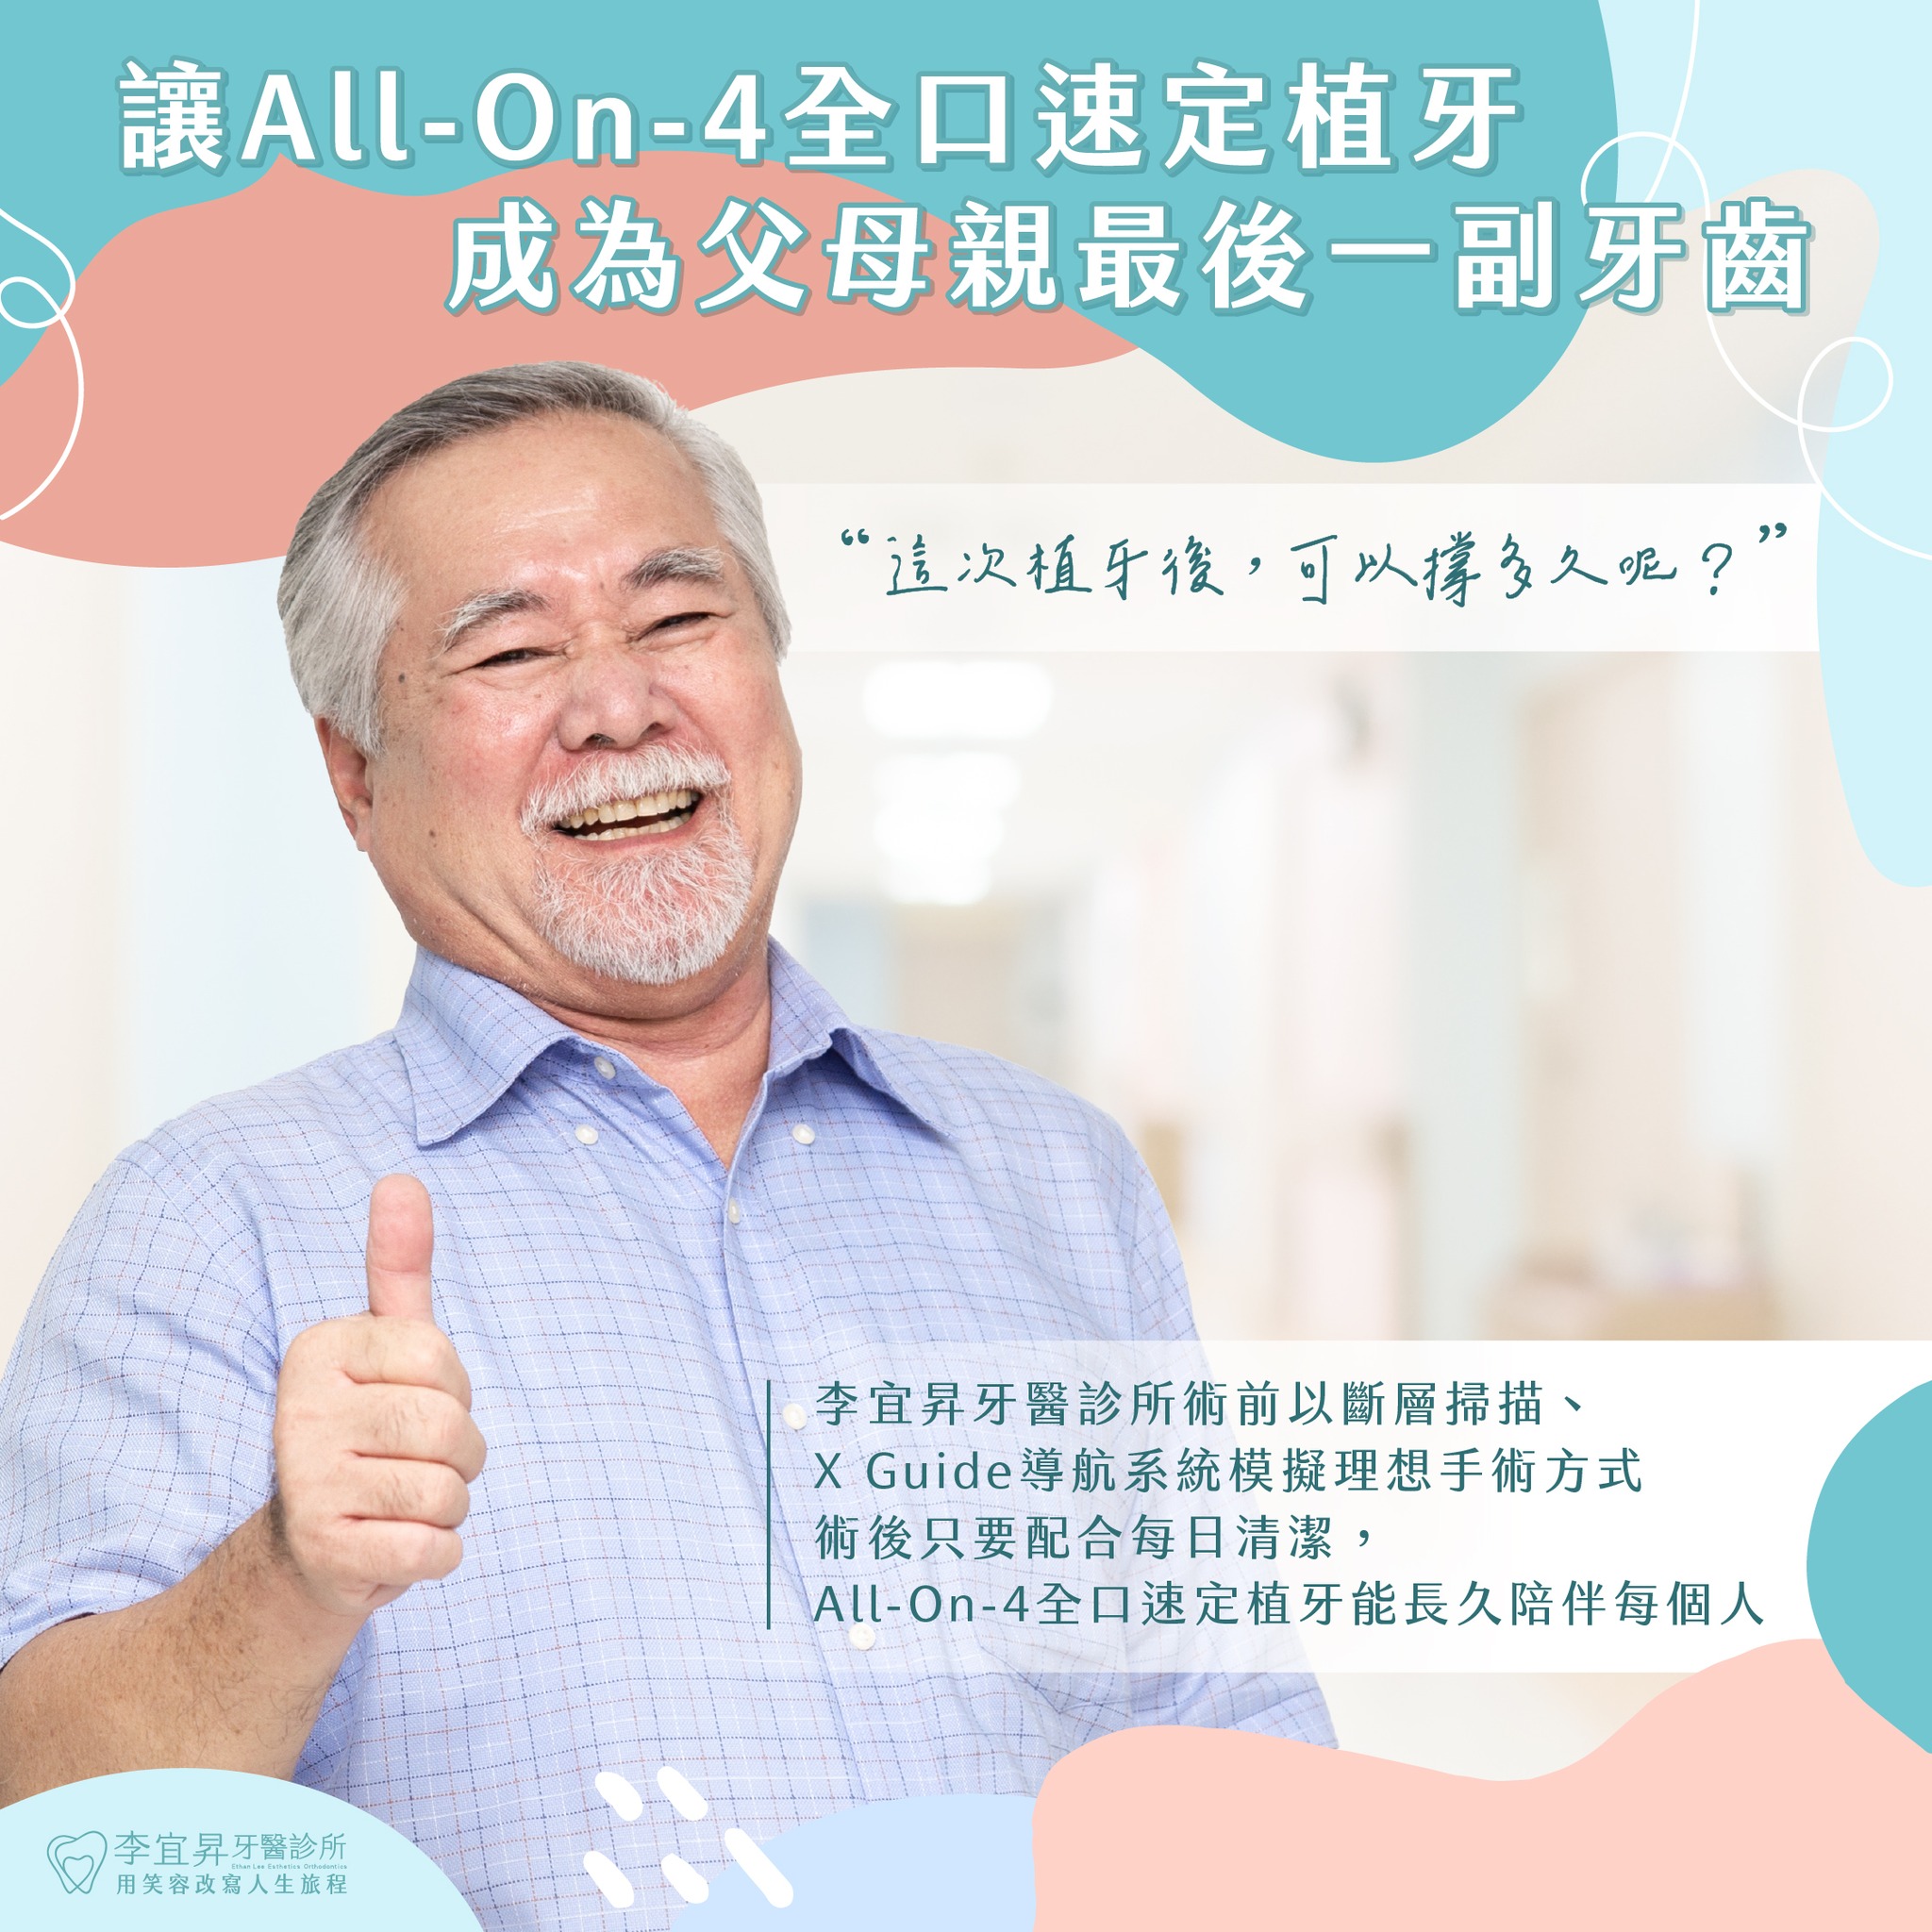 Read more about the article All-On-4 全口速定植牙的持久性